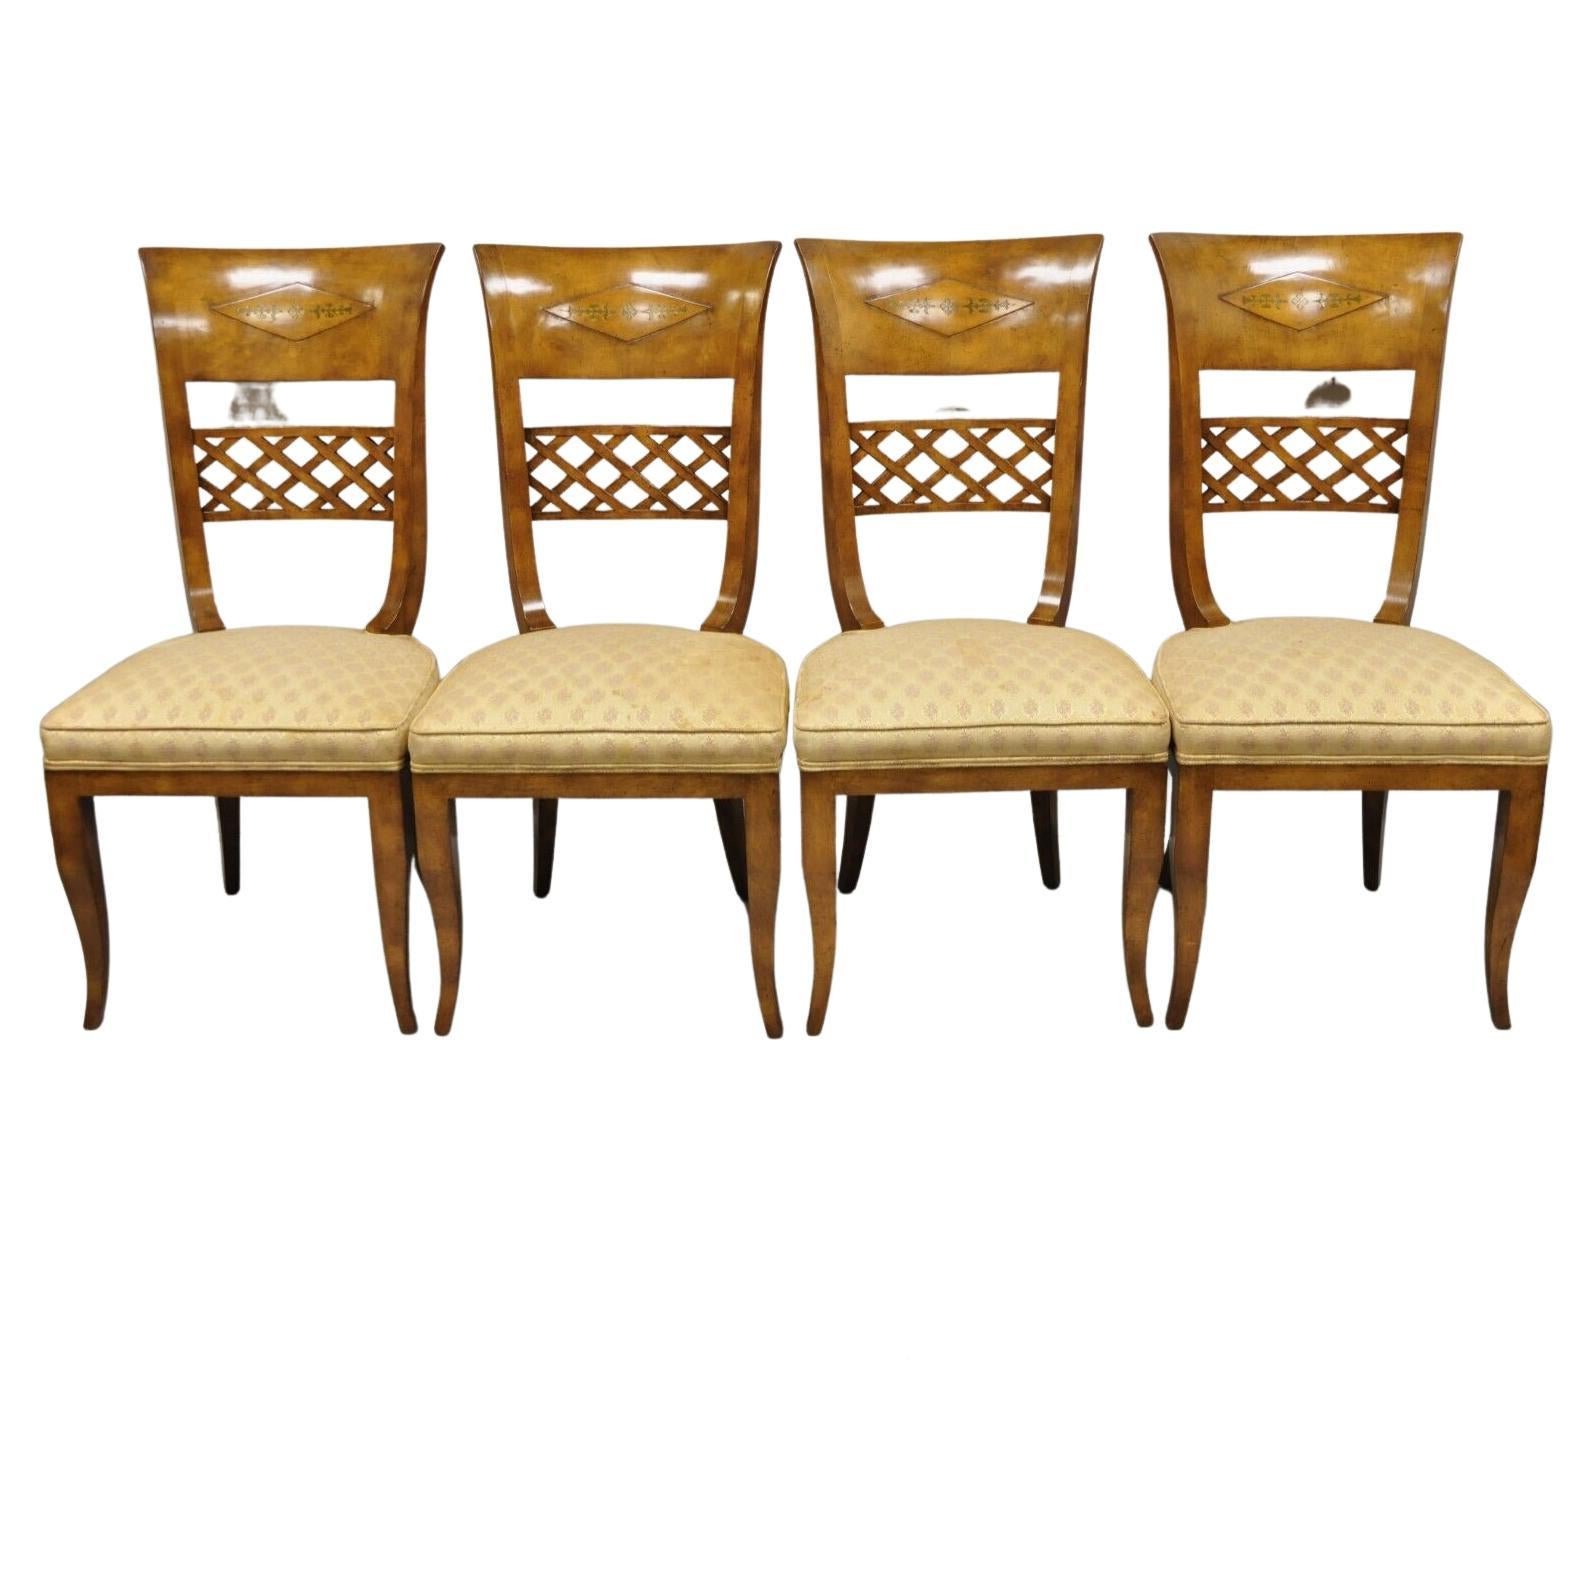 Italian Regency Style Burlwood Brass Inlay Tall Back Dining Chairs - Set of 4 For Sale